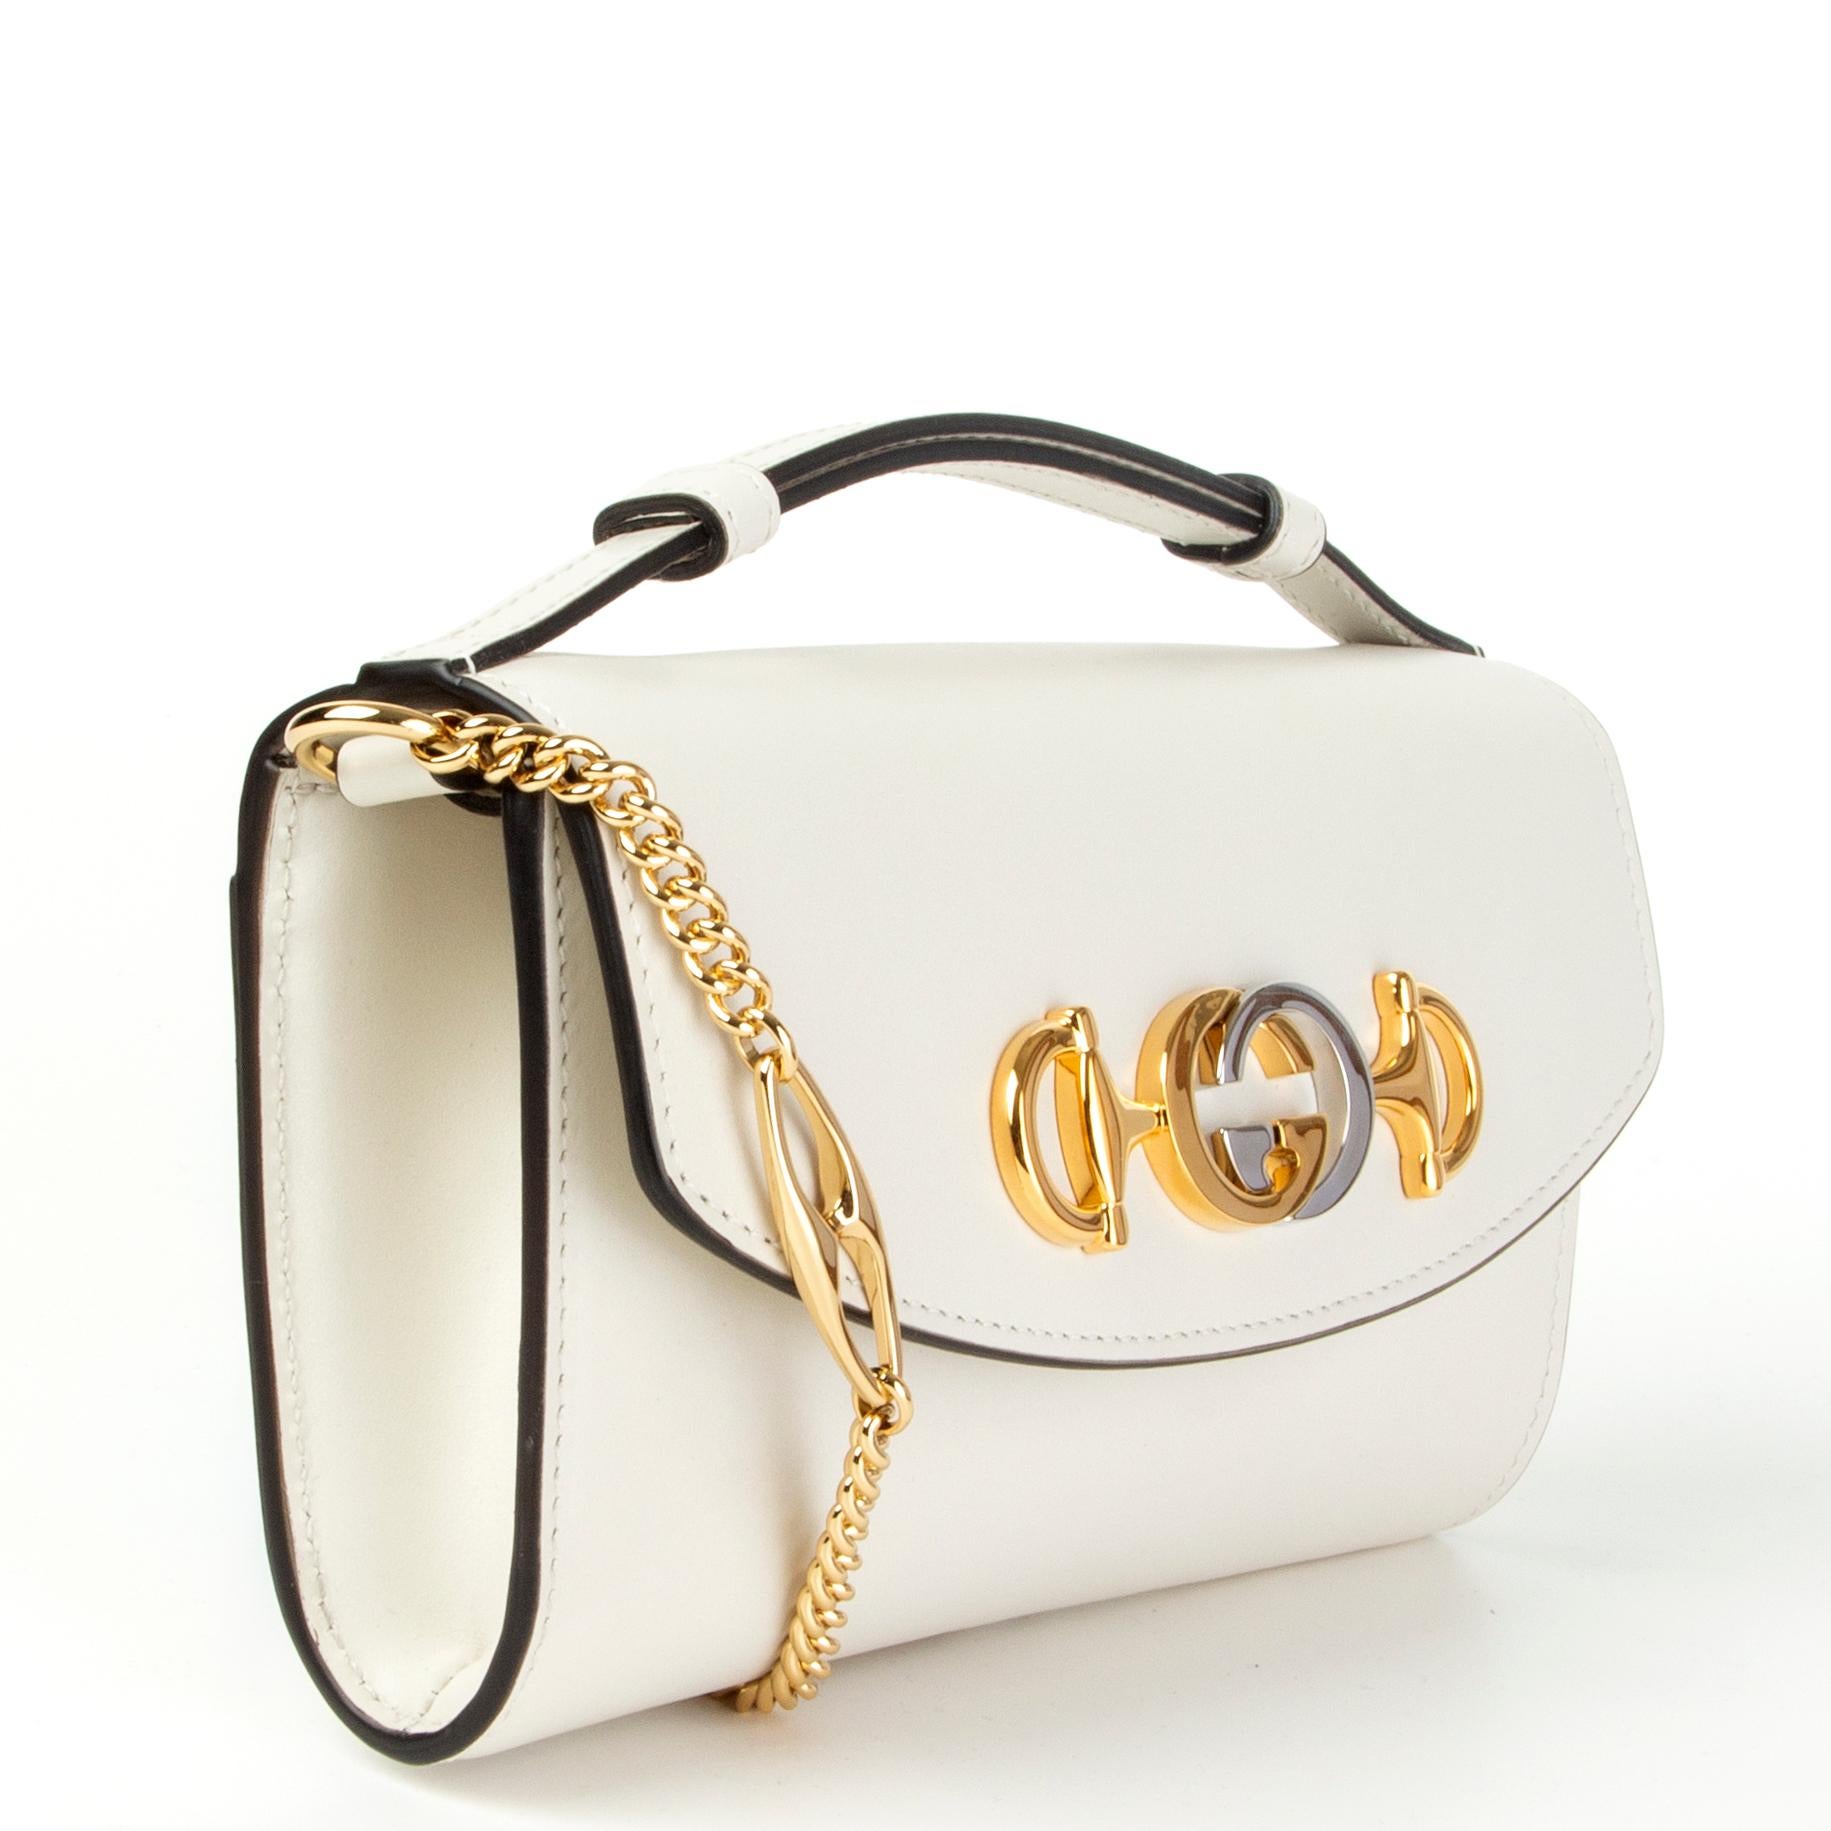 Gucci 'Zumi' mini bag in off-white smooth leather featuring interlocking GG horsebit in silver- and gold-tone metal. Open pocket on the back and detachable gold-tone metal chain shoulder strap. Opens with a magnetic button under the flap and is